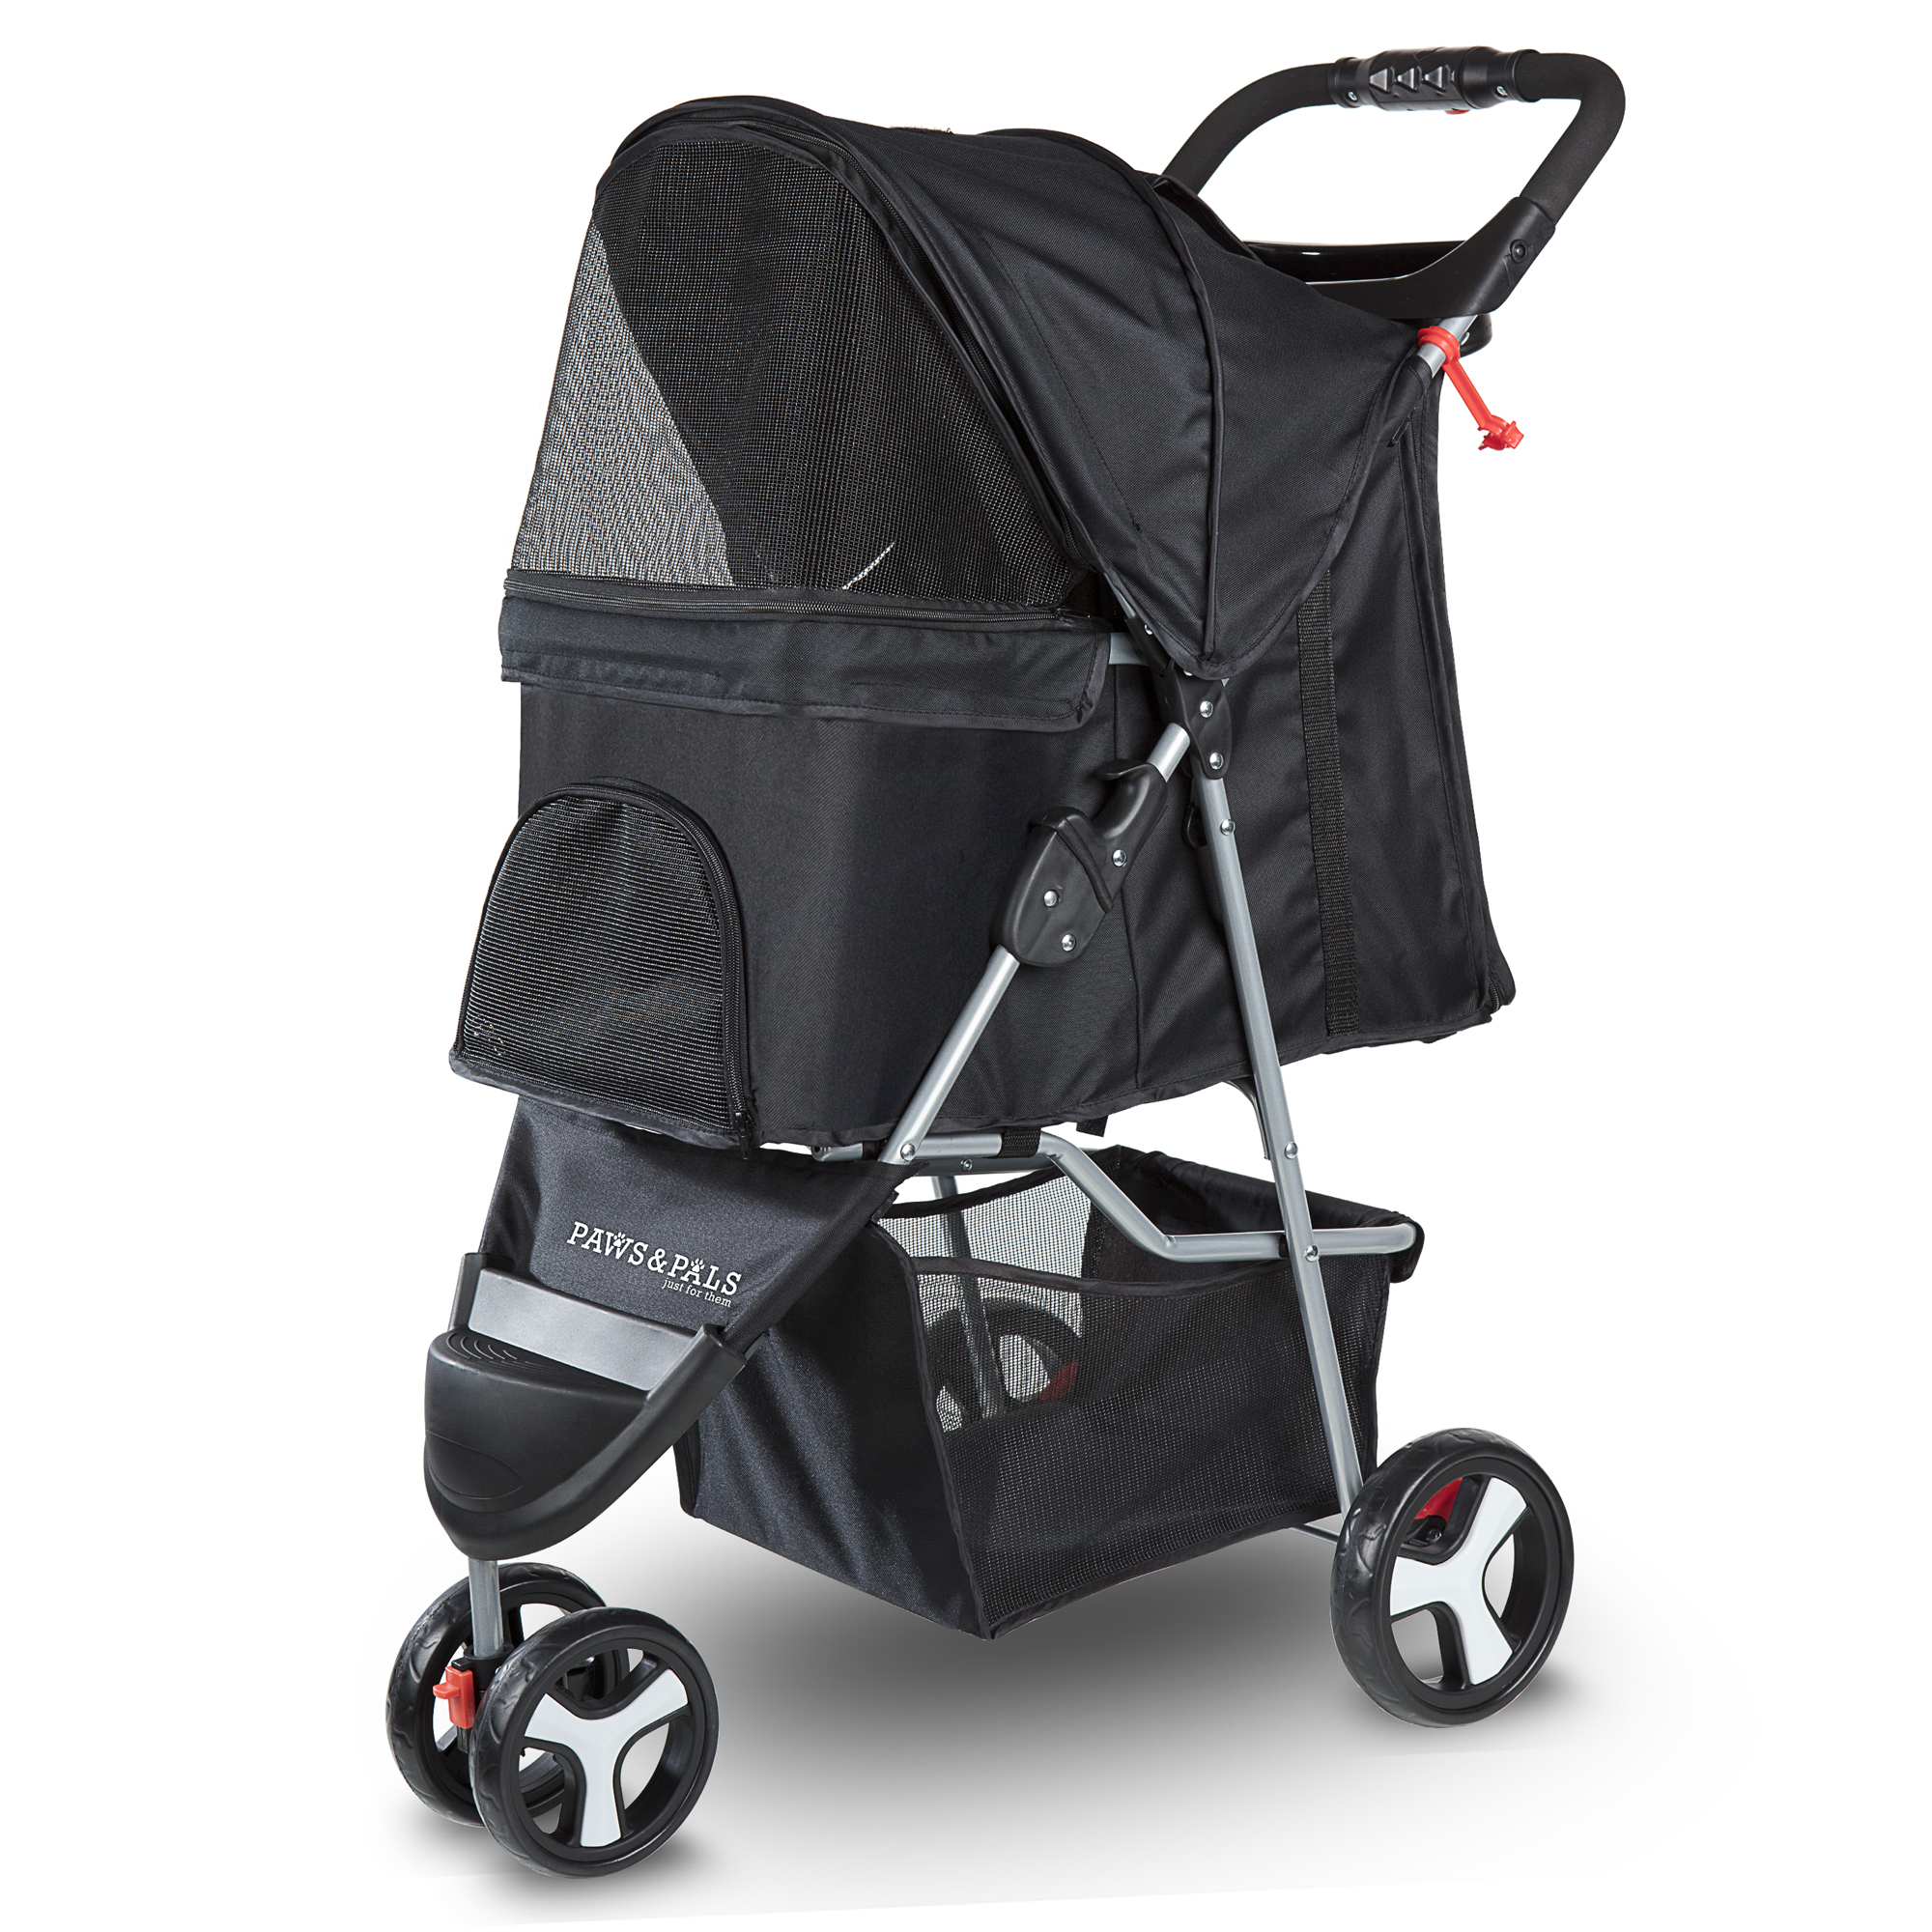 Paws & Pals Pet Stroller for Cats & Dogs Folding 3-Wheel Carrier Jogger (Black) (Small) - image 1 of 3